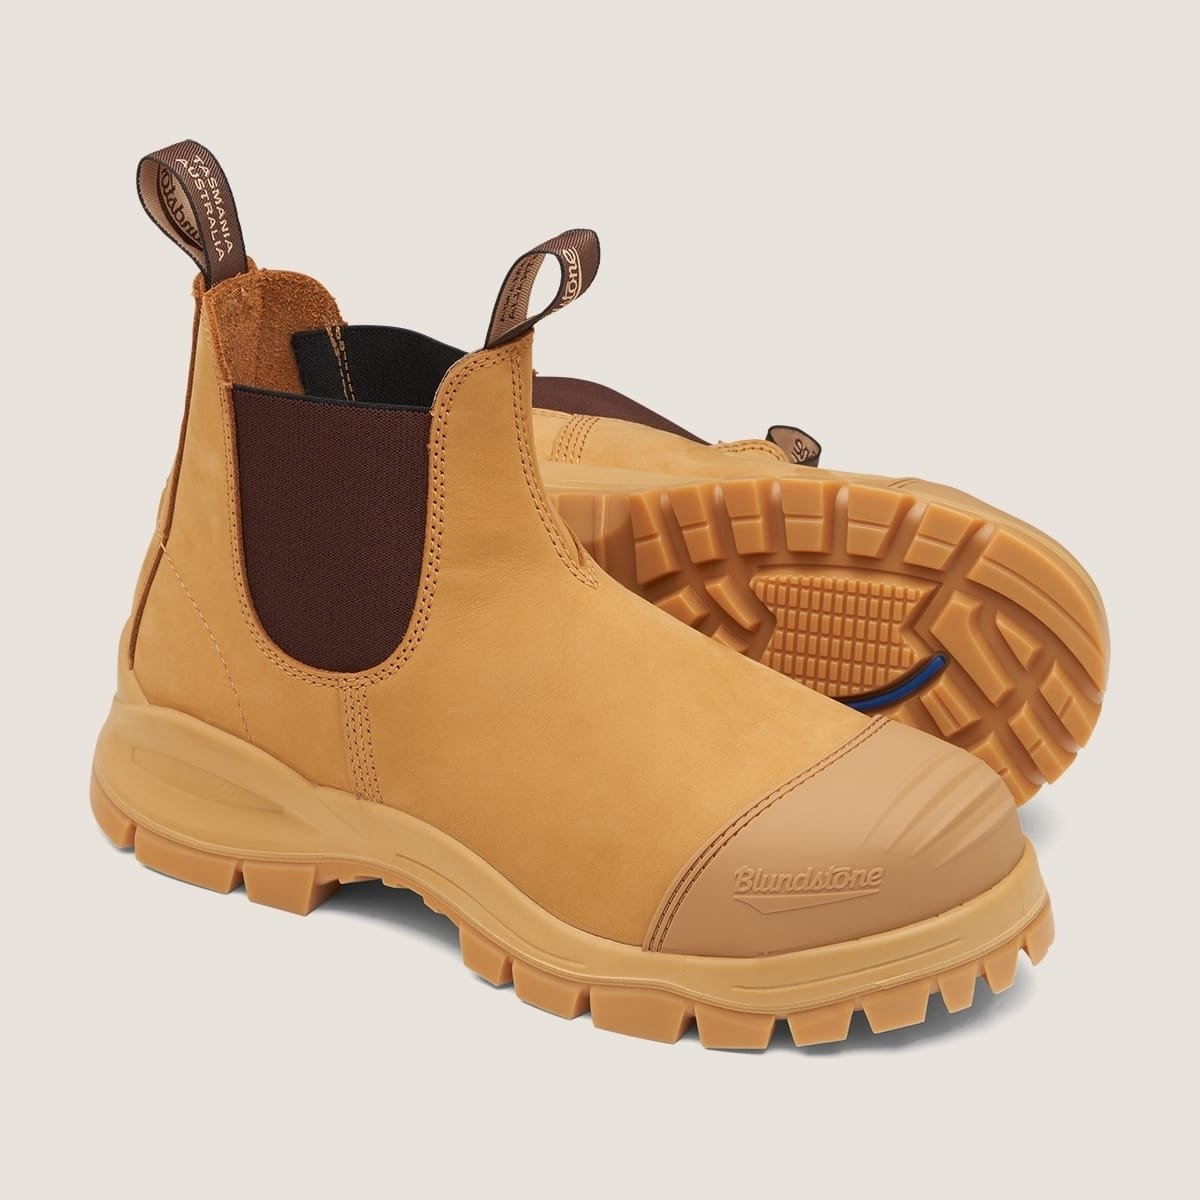 BLUNDSTONE SAFETY Men's Extreme Series Steel Toe Chelsea Work Boot Wheat - 989 WHEAT - WHEAT, 10.5